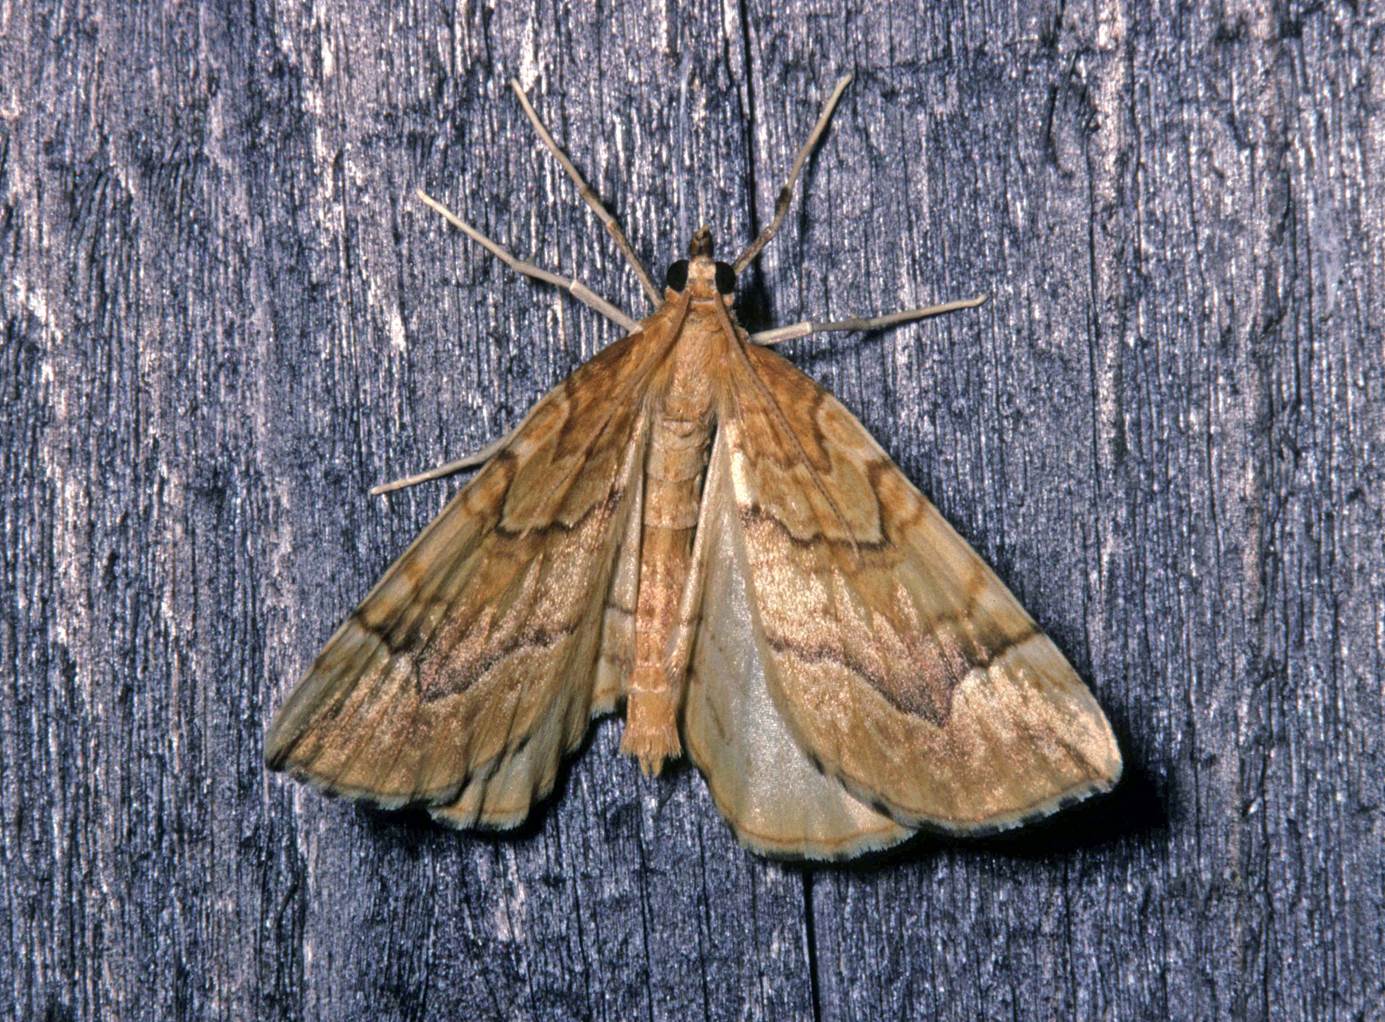 A close-up of a moth

Description automatically generated